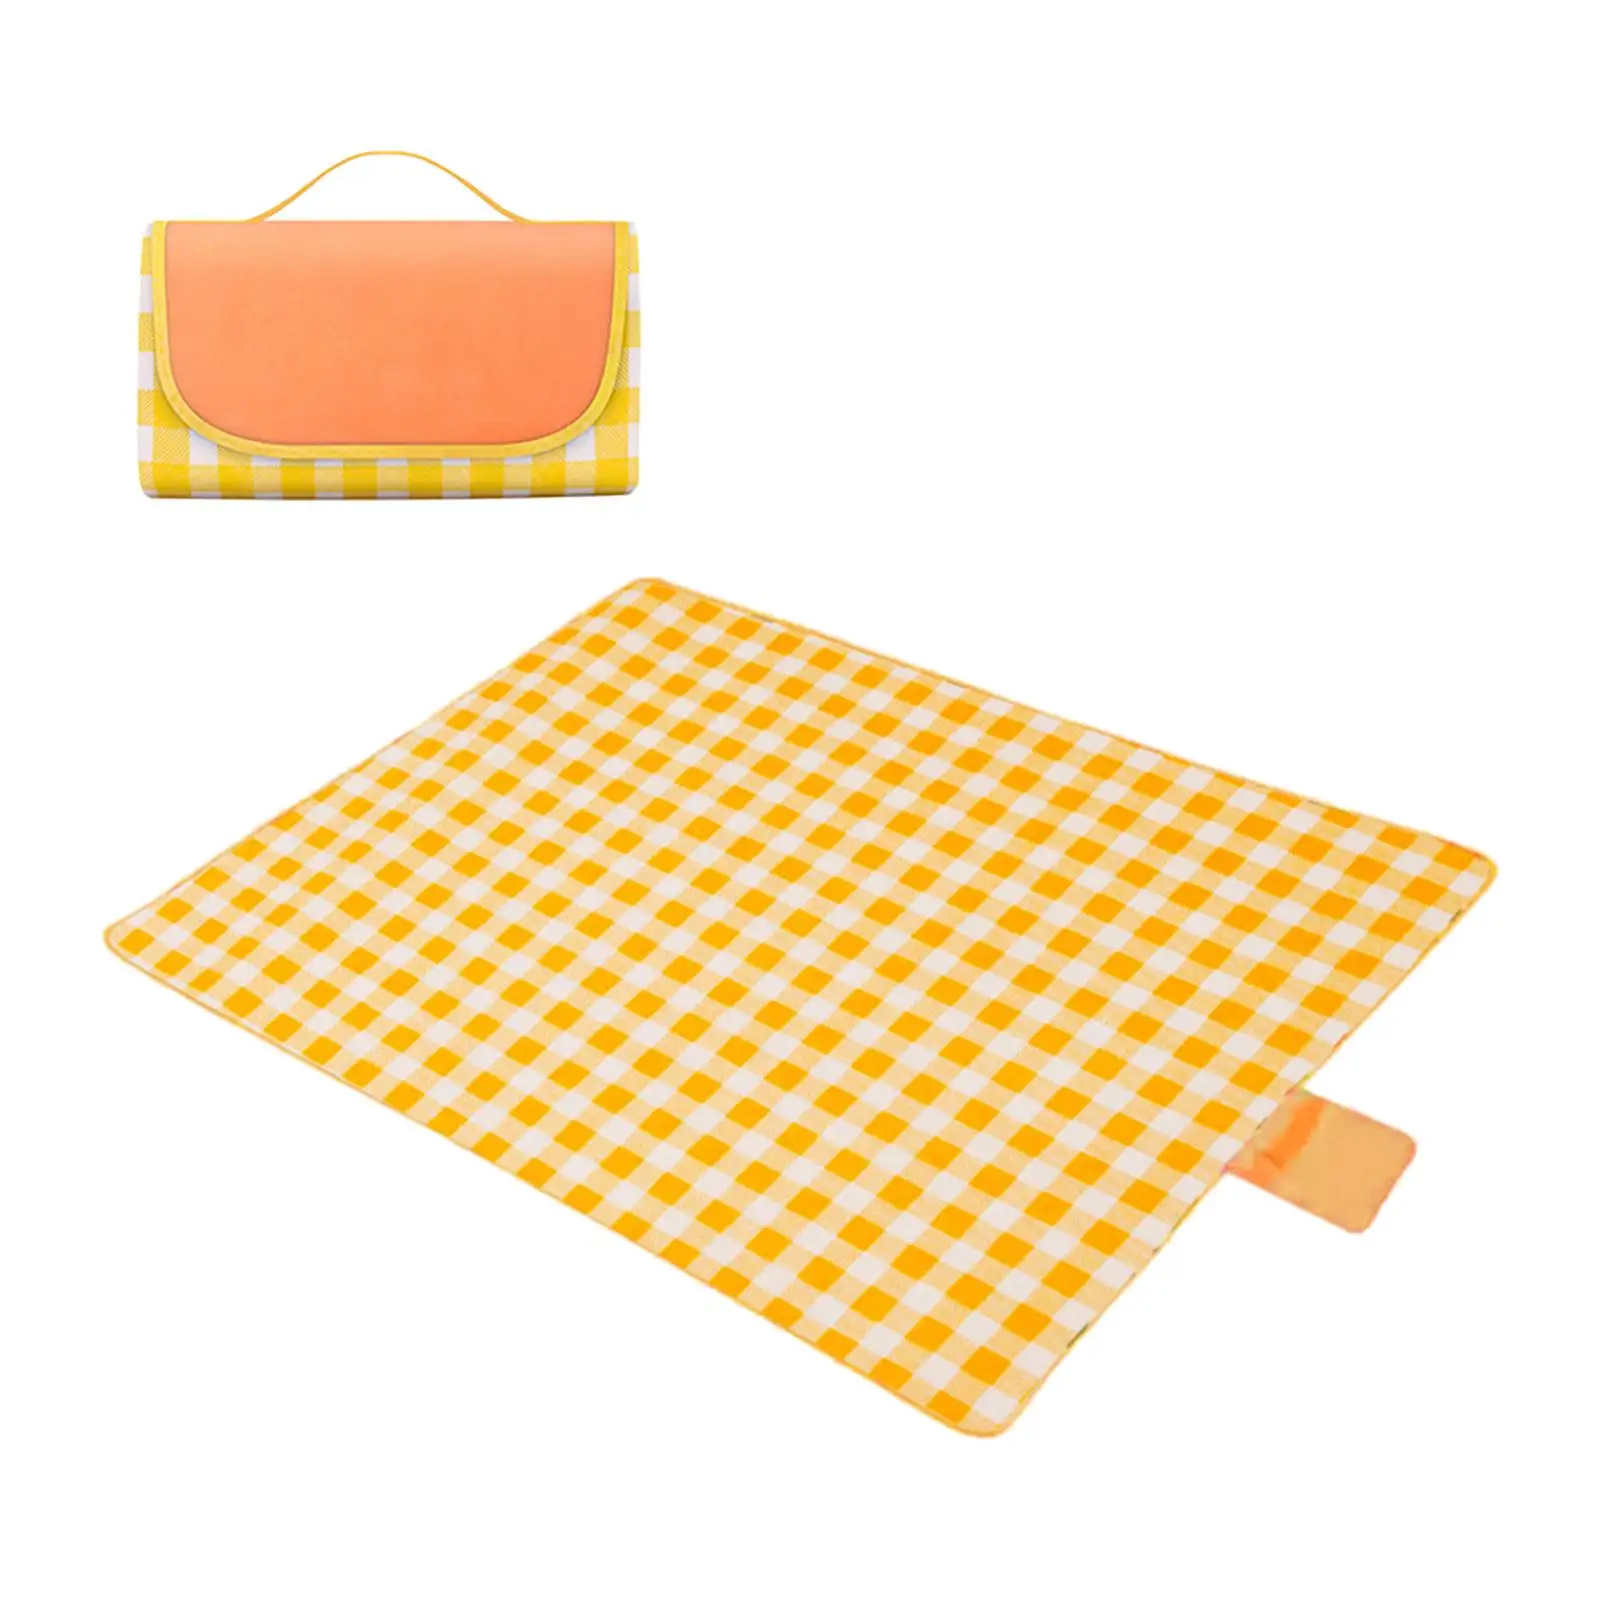 Large Picnic Outdoor Blanket with Portable Handle for travel Camping